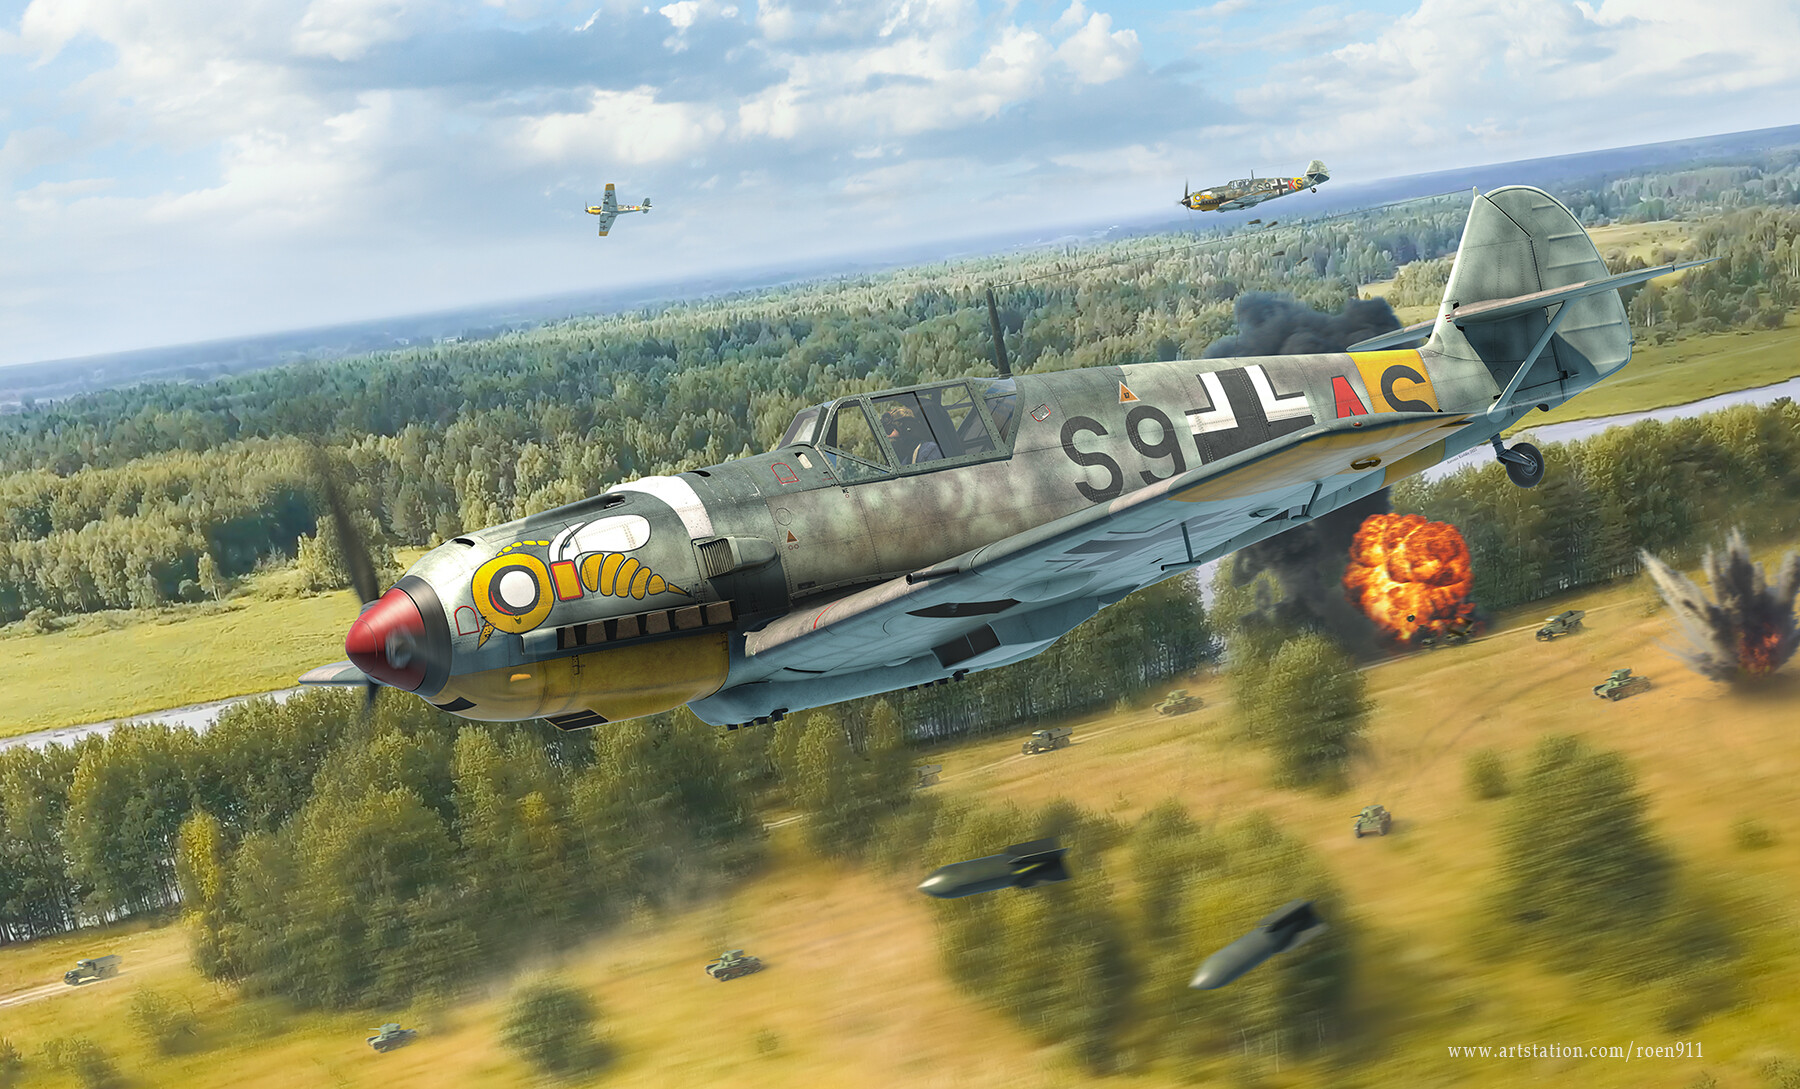 General 1800x1089 ArtStation aircraft vehicle military aircraft military military vehicle Messerschmitt Bf 109 Messerschmitt Luftwaffe German aircraft flying World War II clouds sky watermarked men Antonis Karidis pilot trees blurred motion blur explosion missiles side view